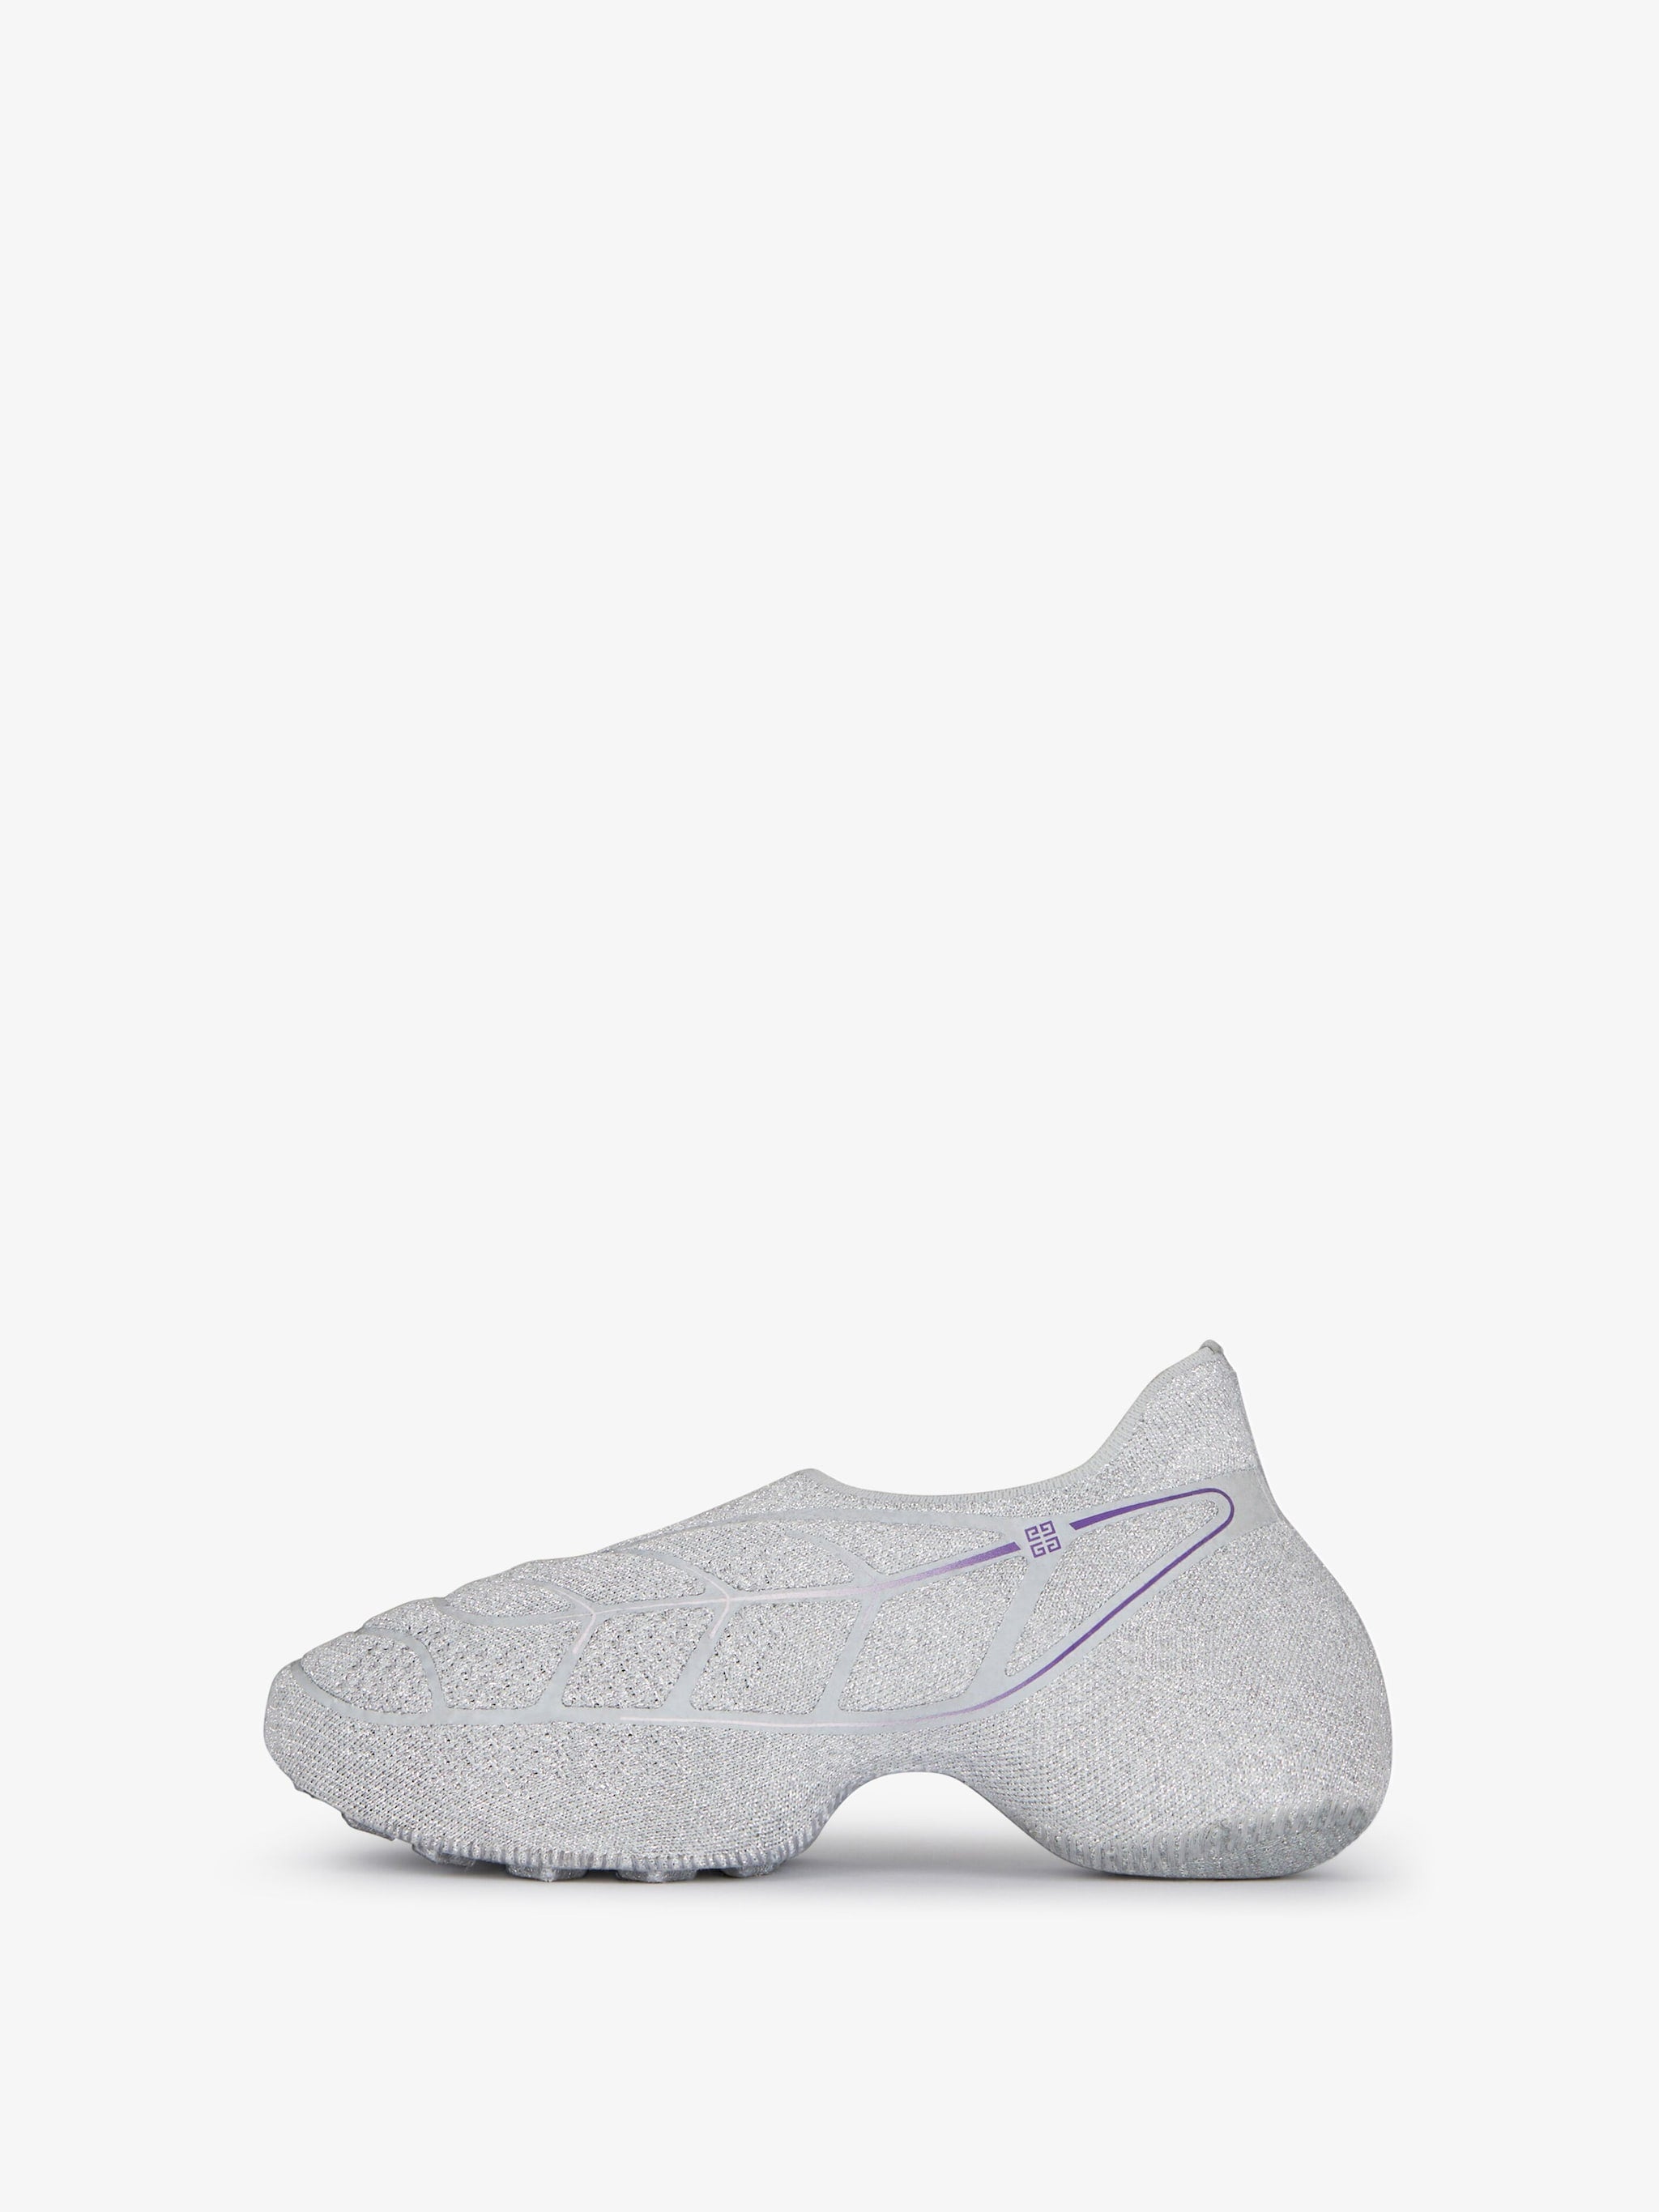 Givenchy TK-360+ Sneakers In Mesh Grey/ Purple